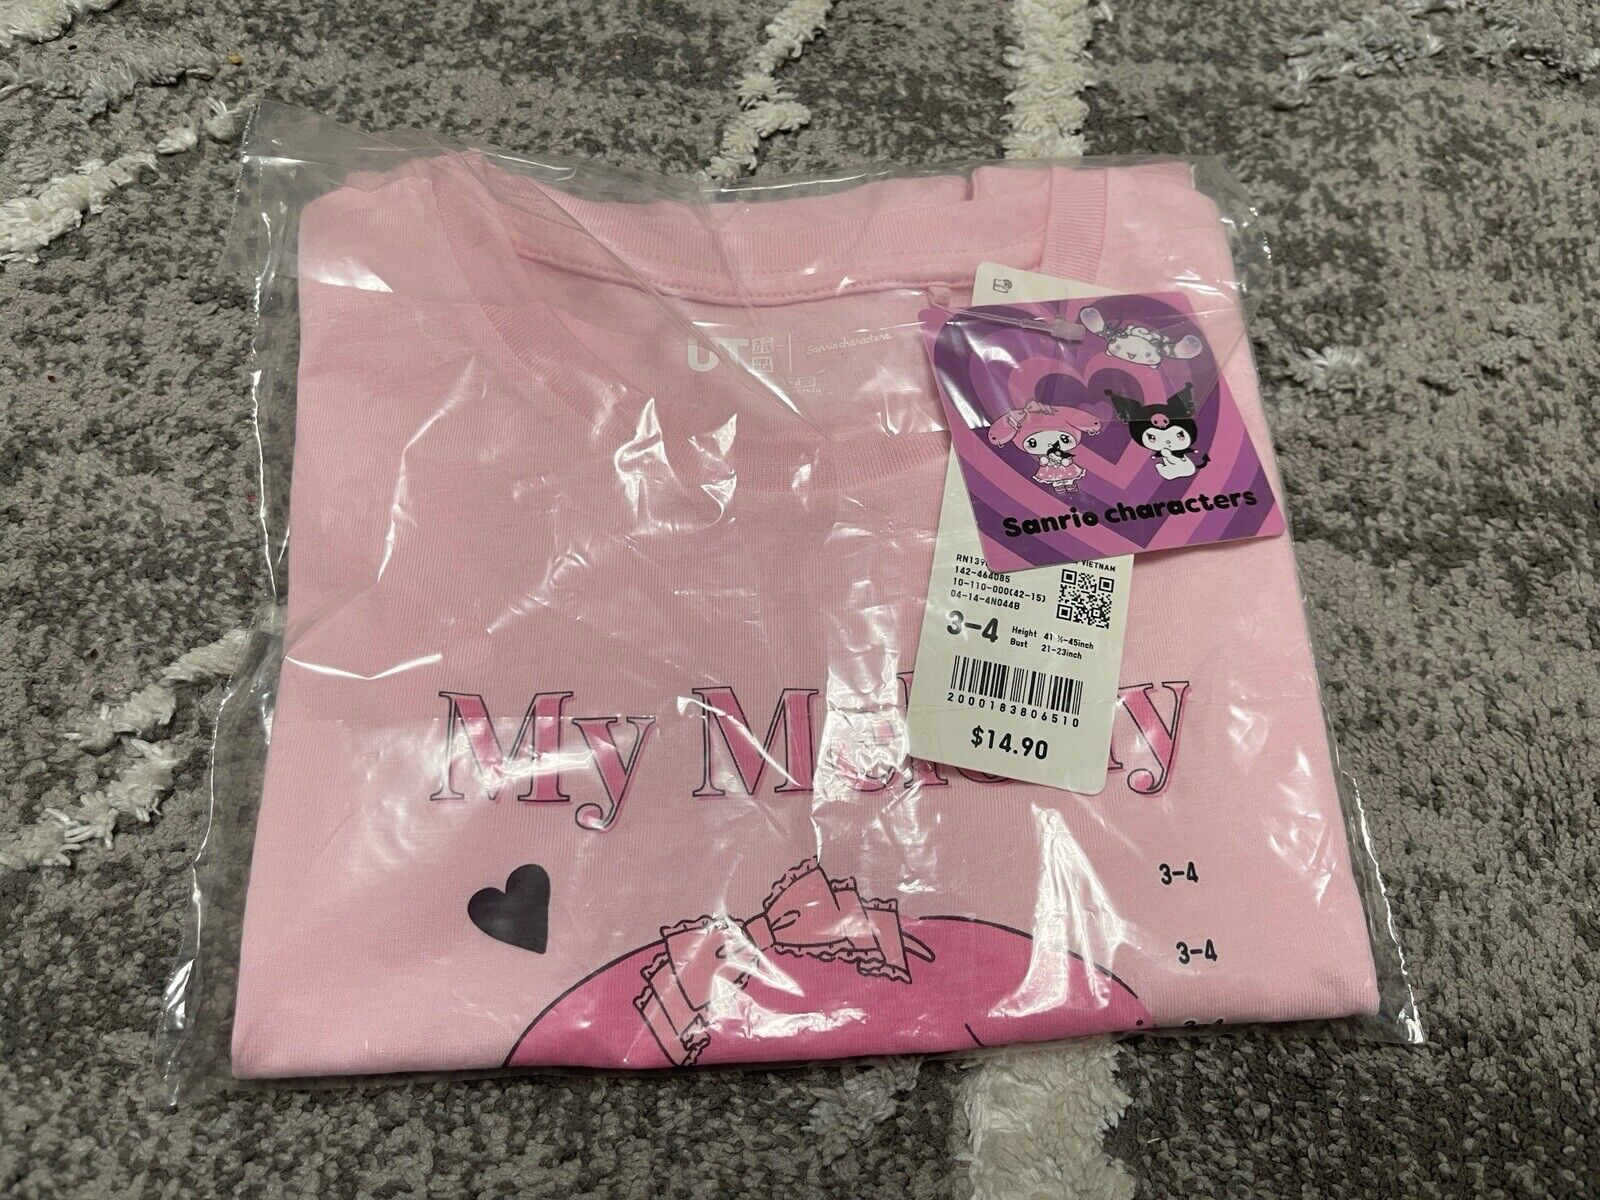 Uniqlo Sanrio Characters My Melody Short-Sleeve Graphic T-Shirt 3-4Y (110)